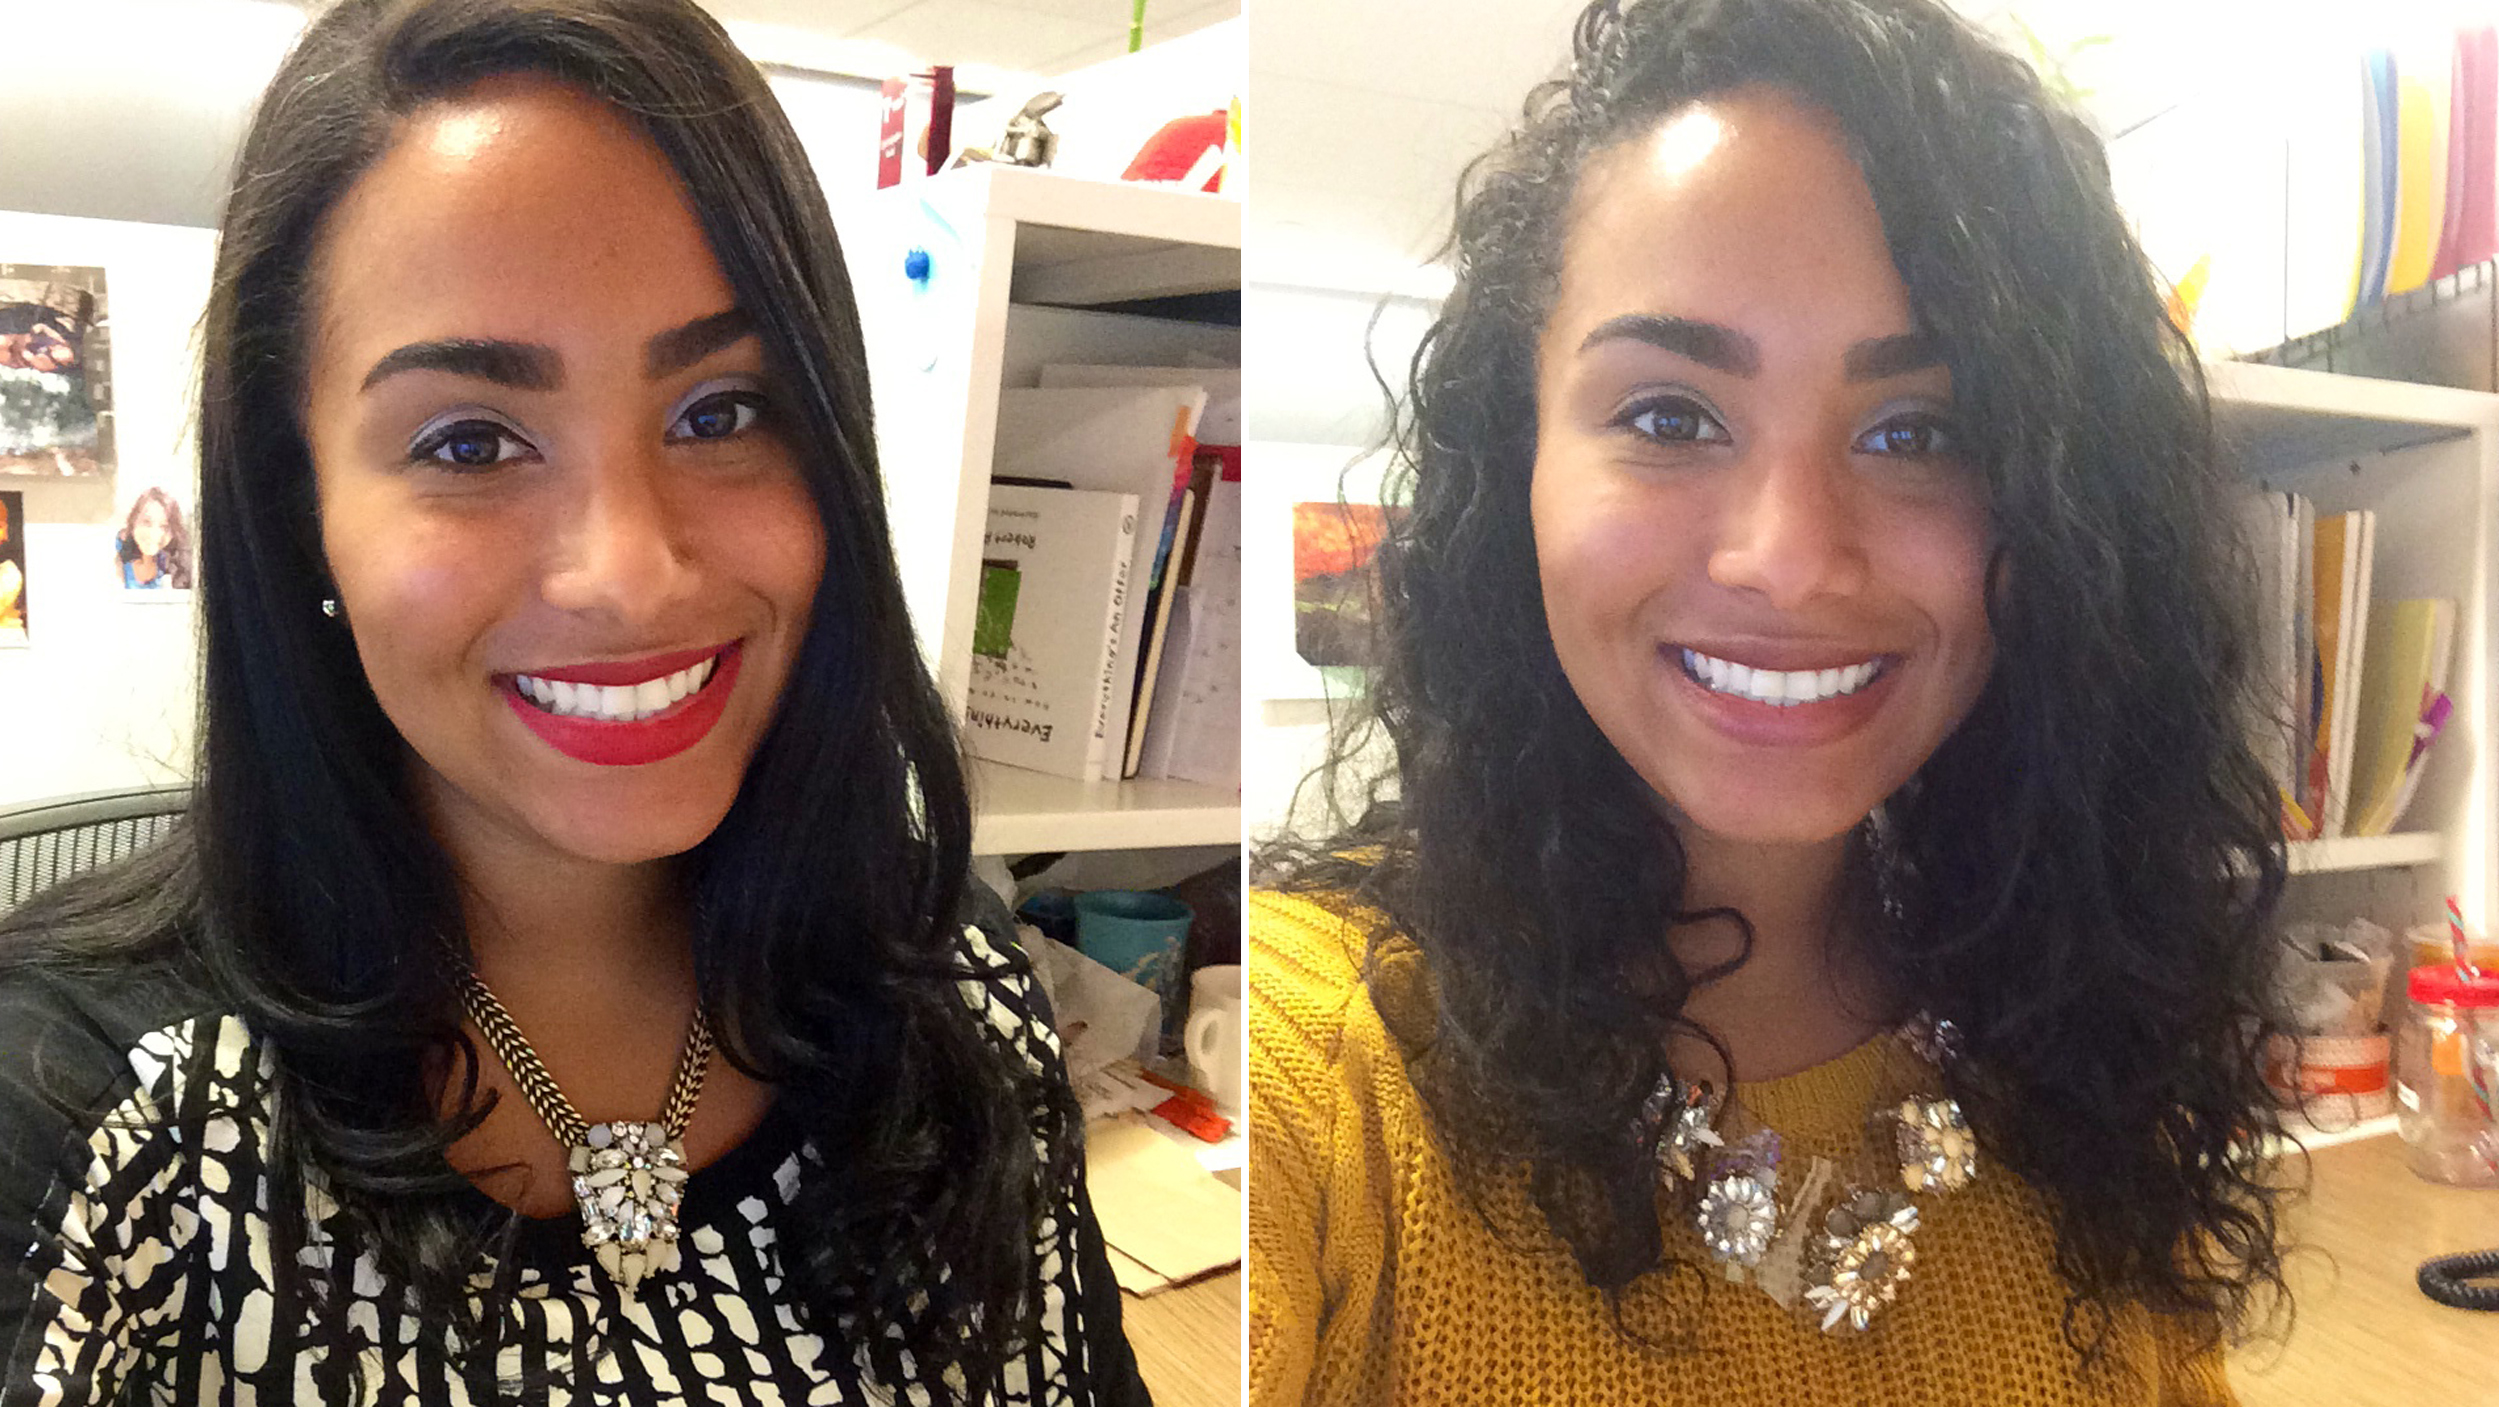 CurlPower: Women switch from curly to straight hairstyles to test reactions